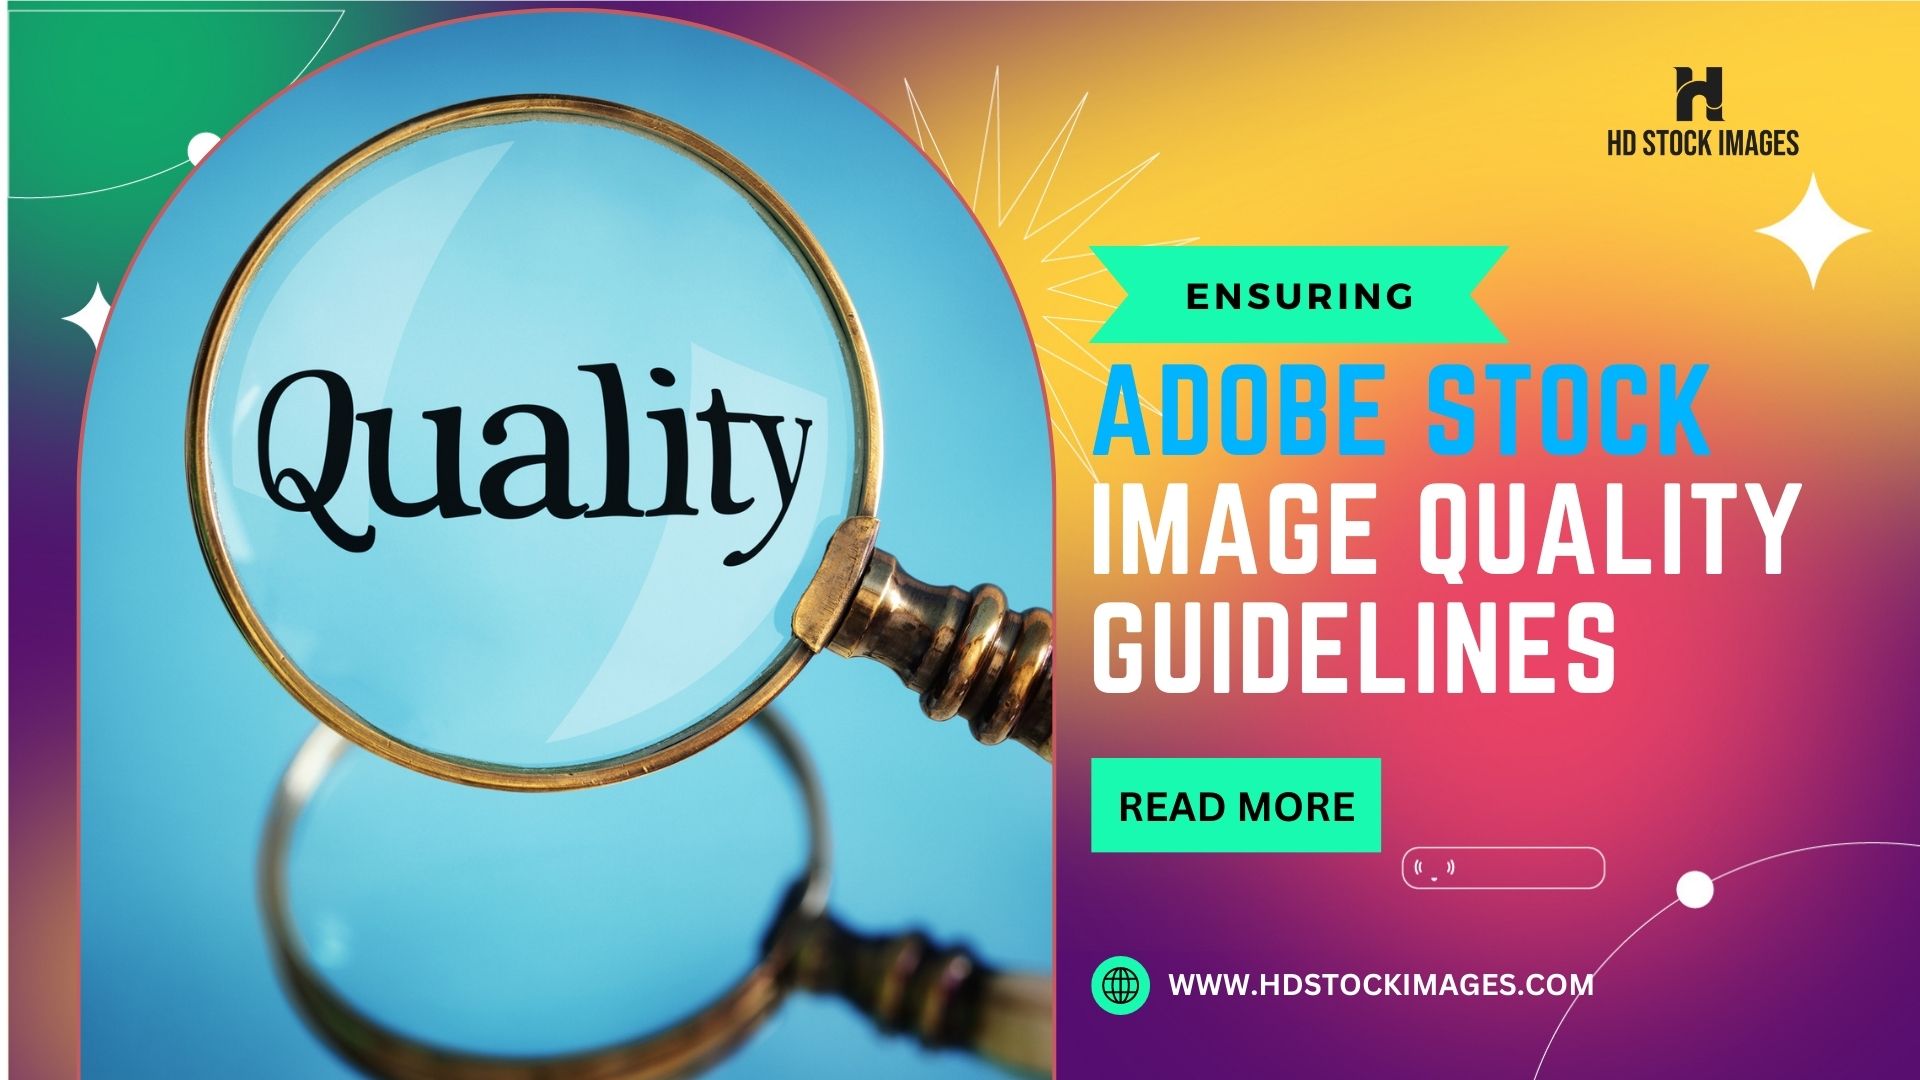 An image of Adobe Stock Image Quality Guidelines